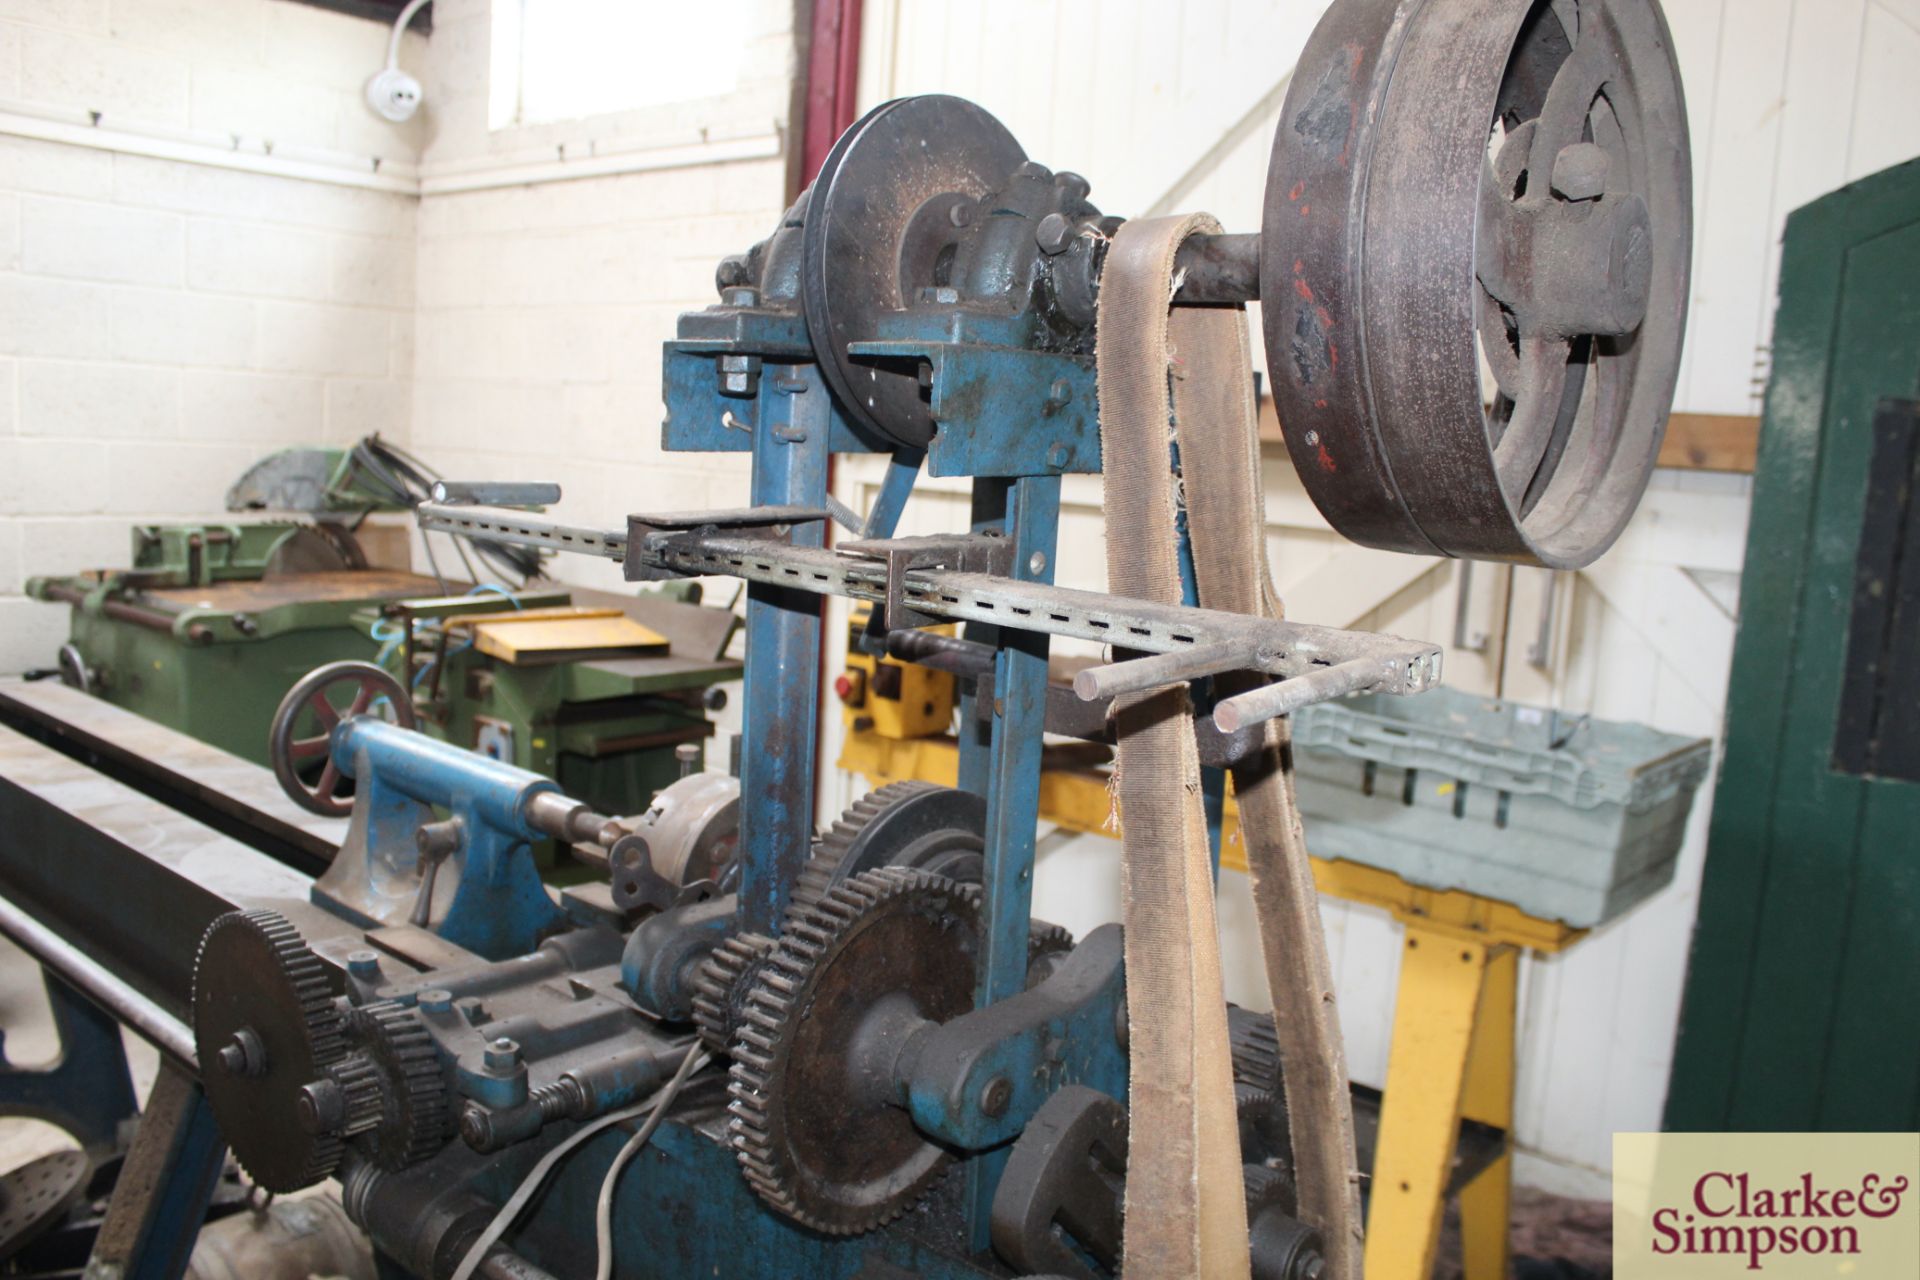 Whitworth metalwork lathe. With fixed steady and face plate. - Image 12 of 18